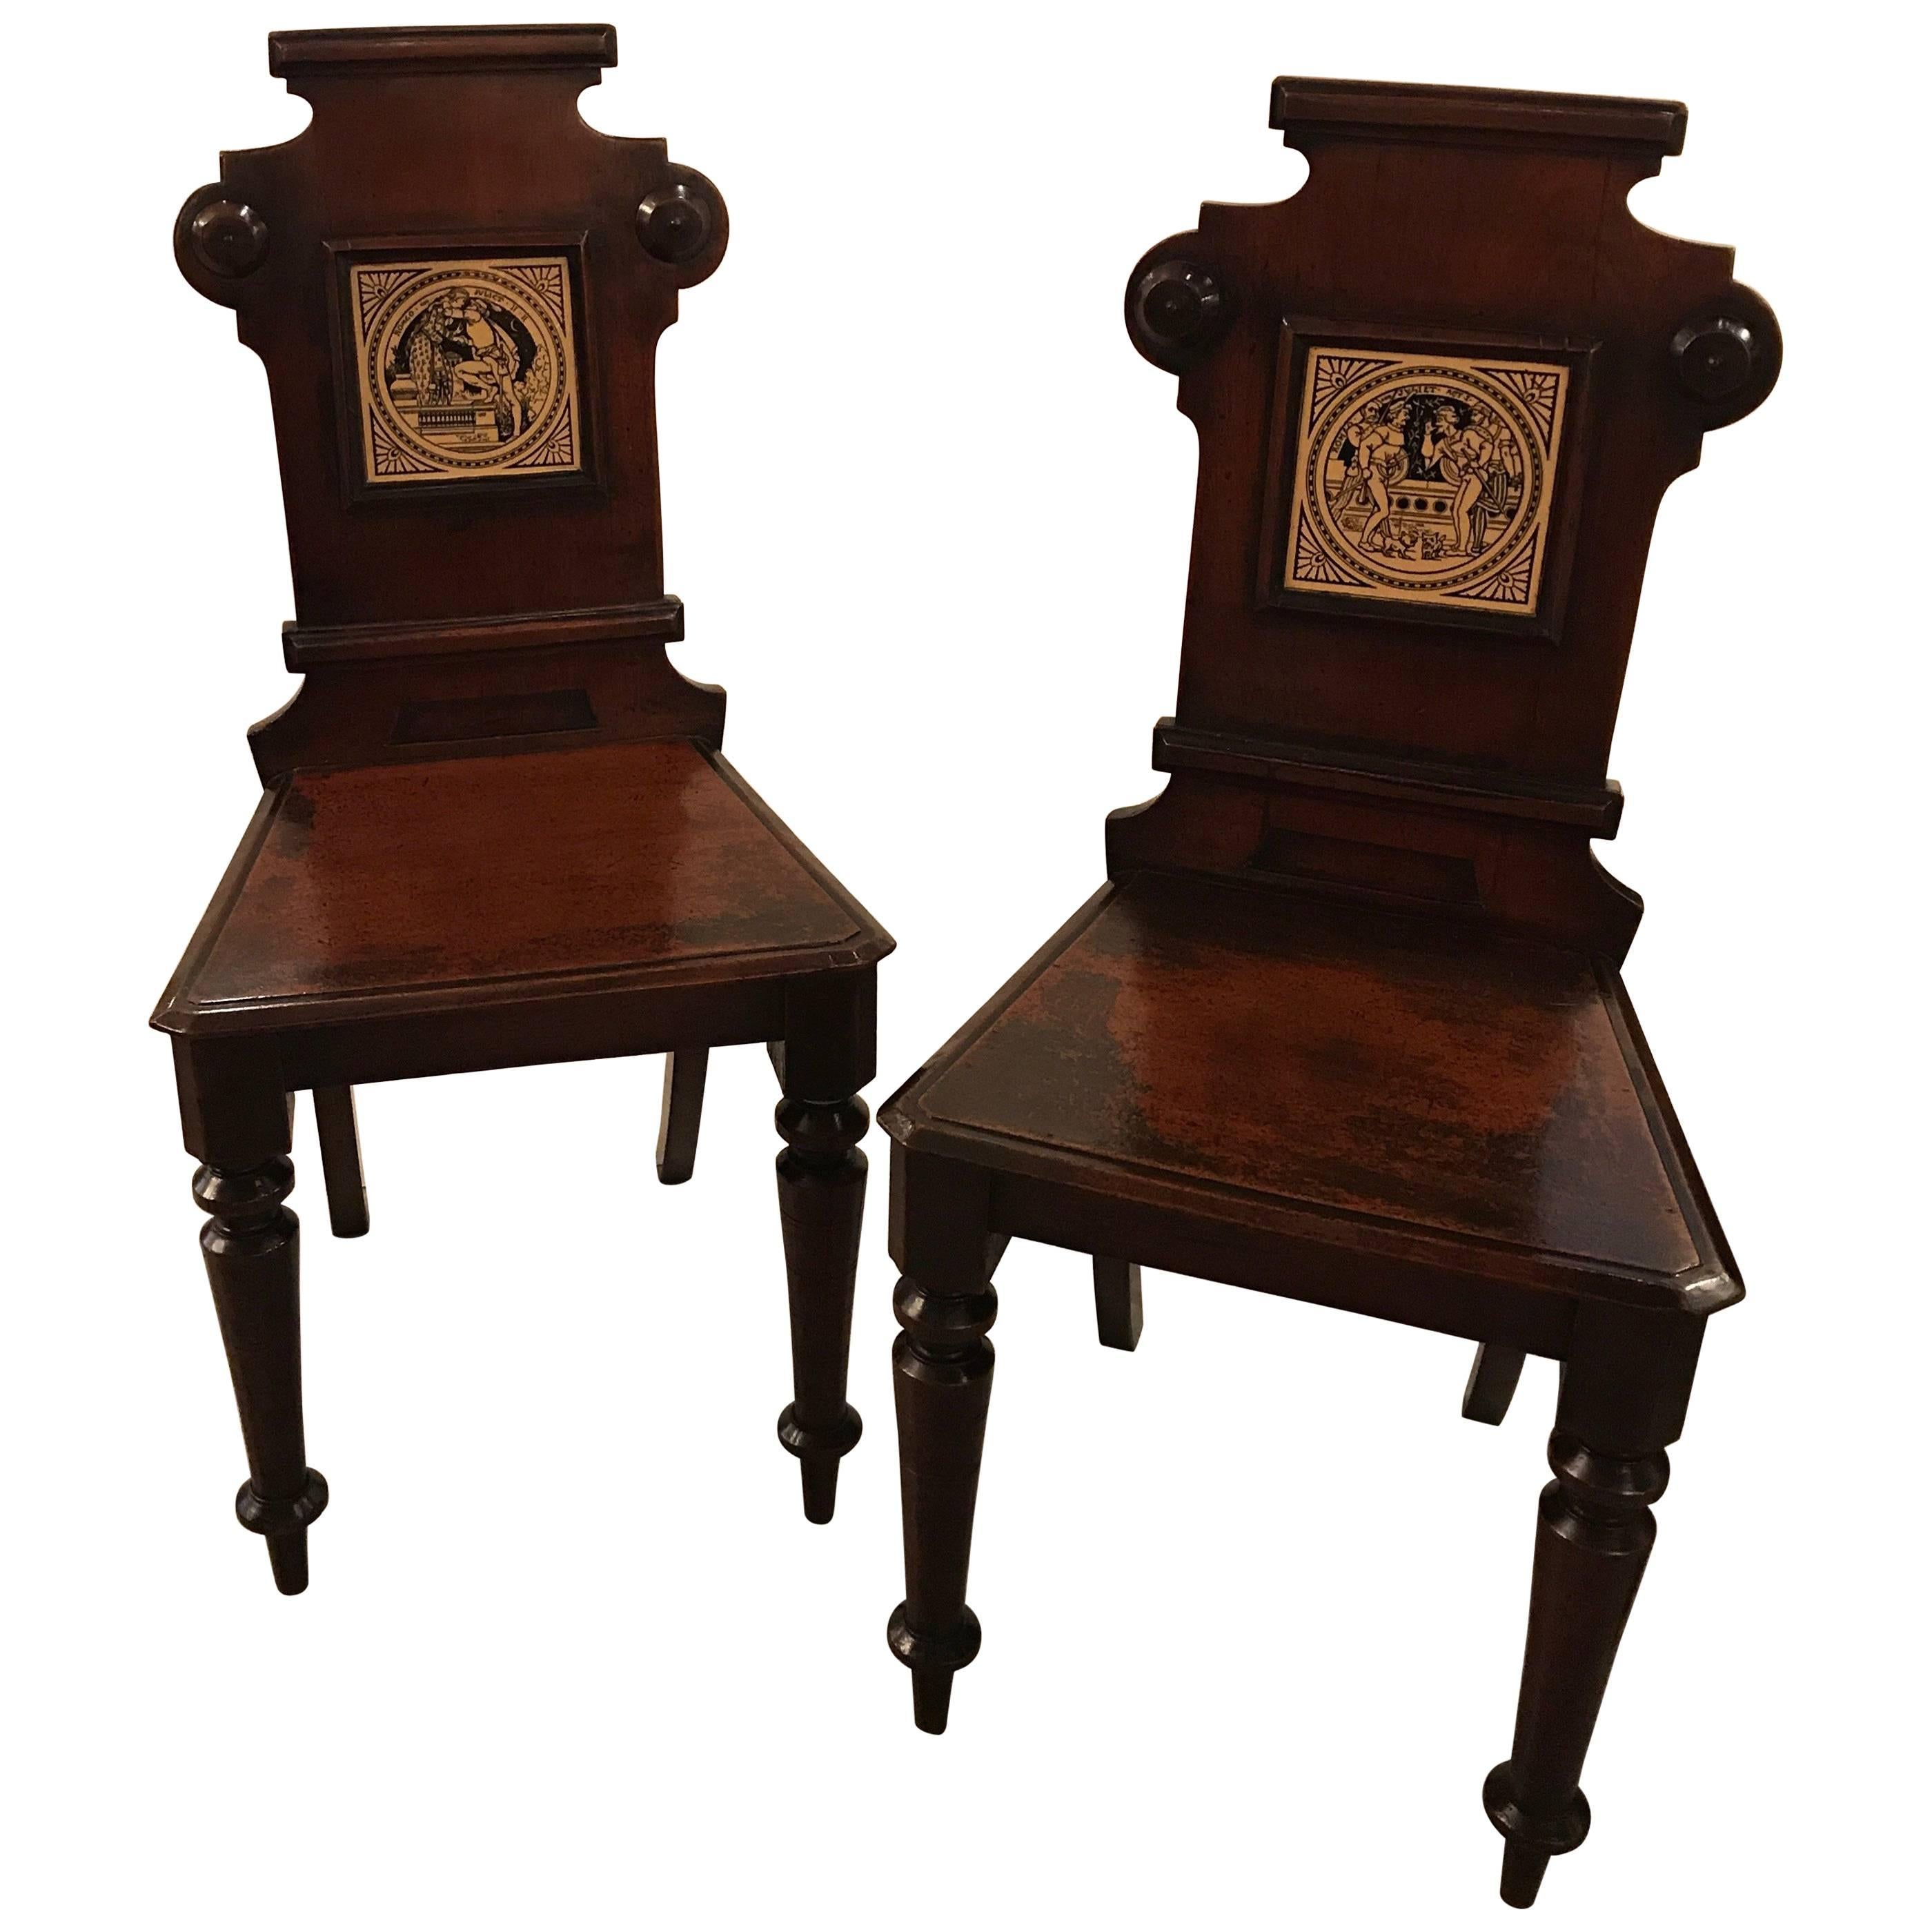 A pair of 19th Century English hall chairs with Minton Tiles